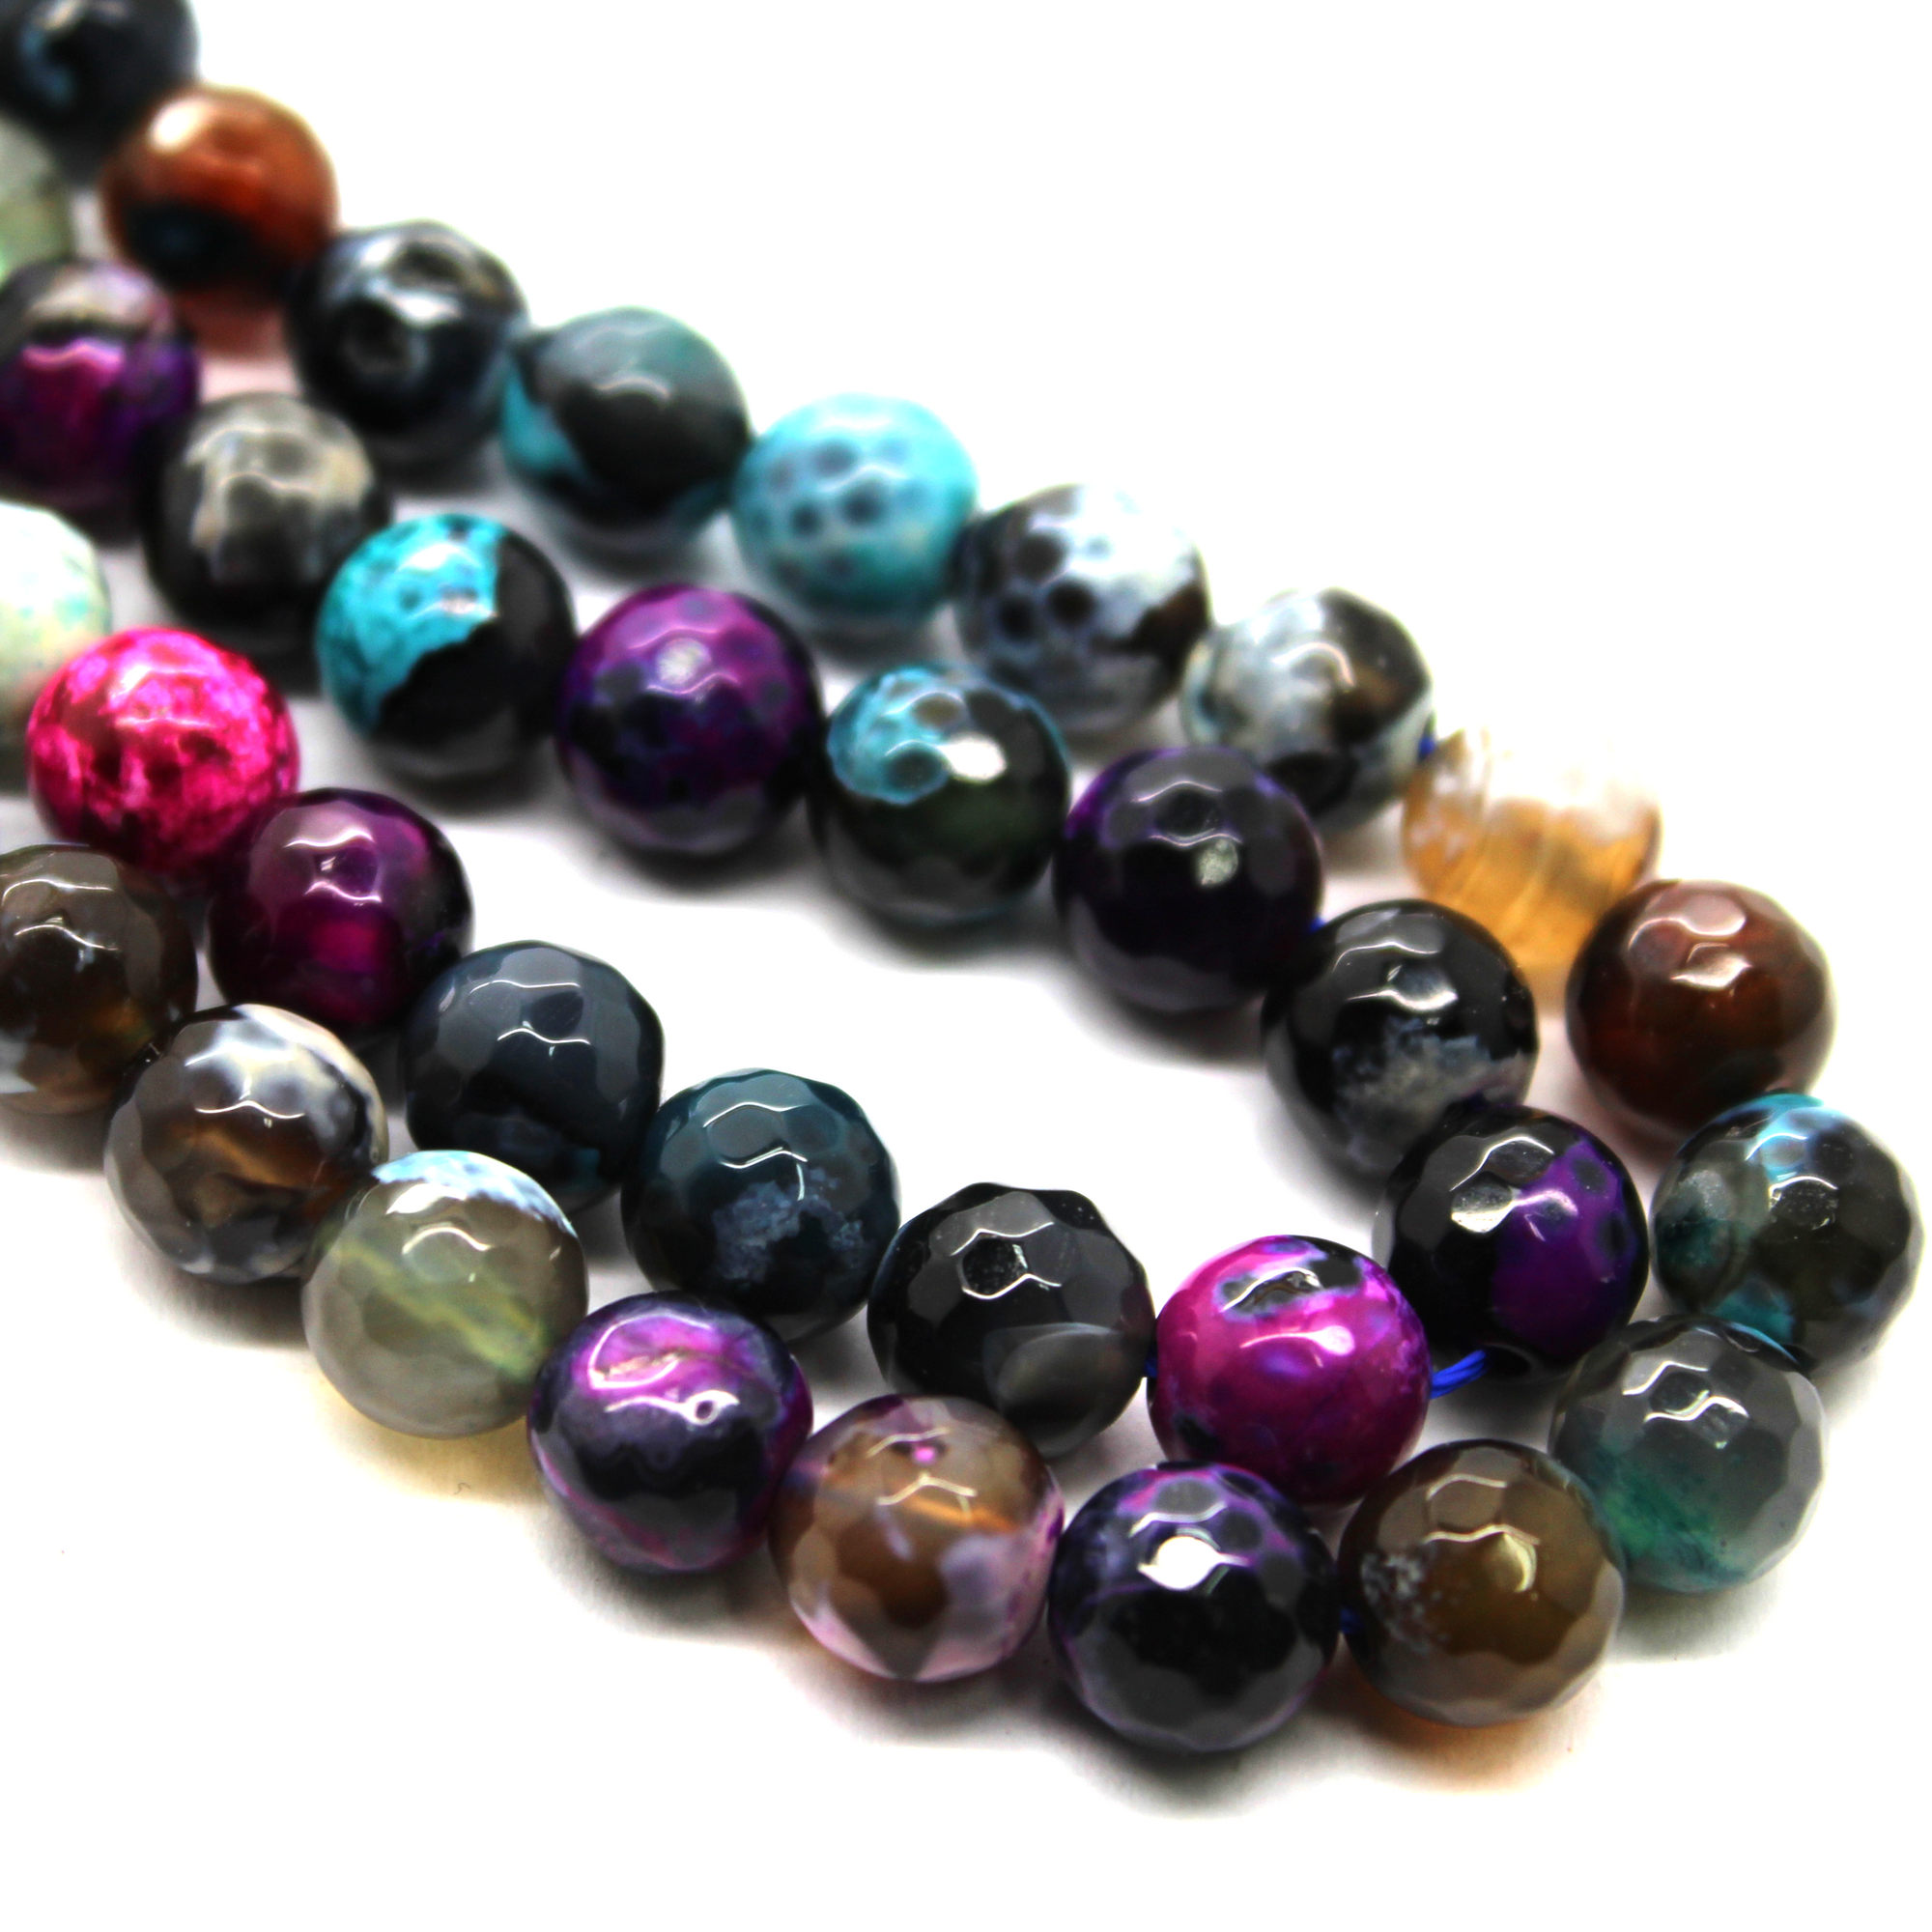 Agate Faceted - Multi color Fire Agate, Semi-Precious Stone, 10mm, 35 pcs per strand - Butterfly Beads